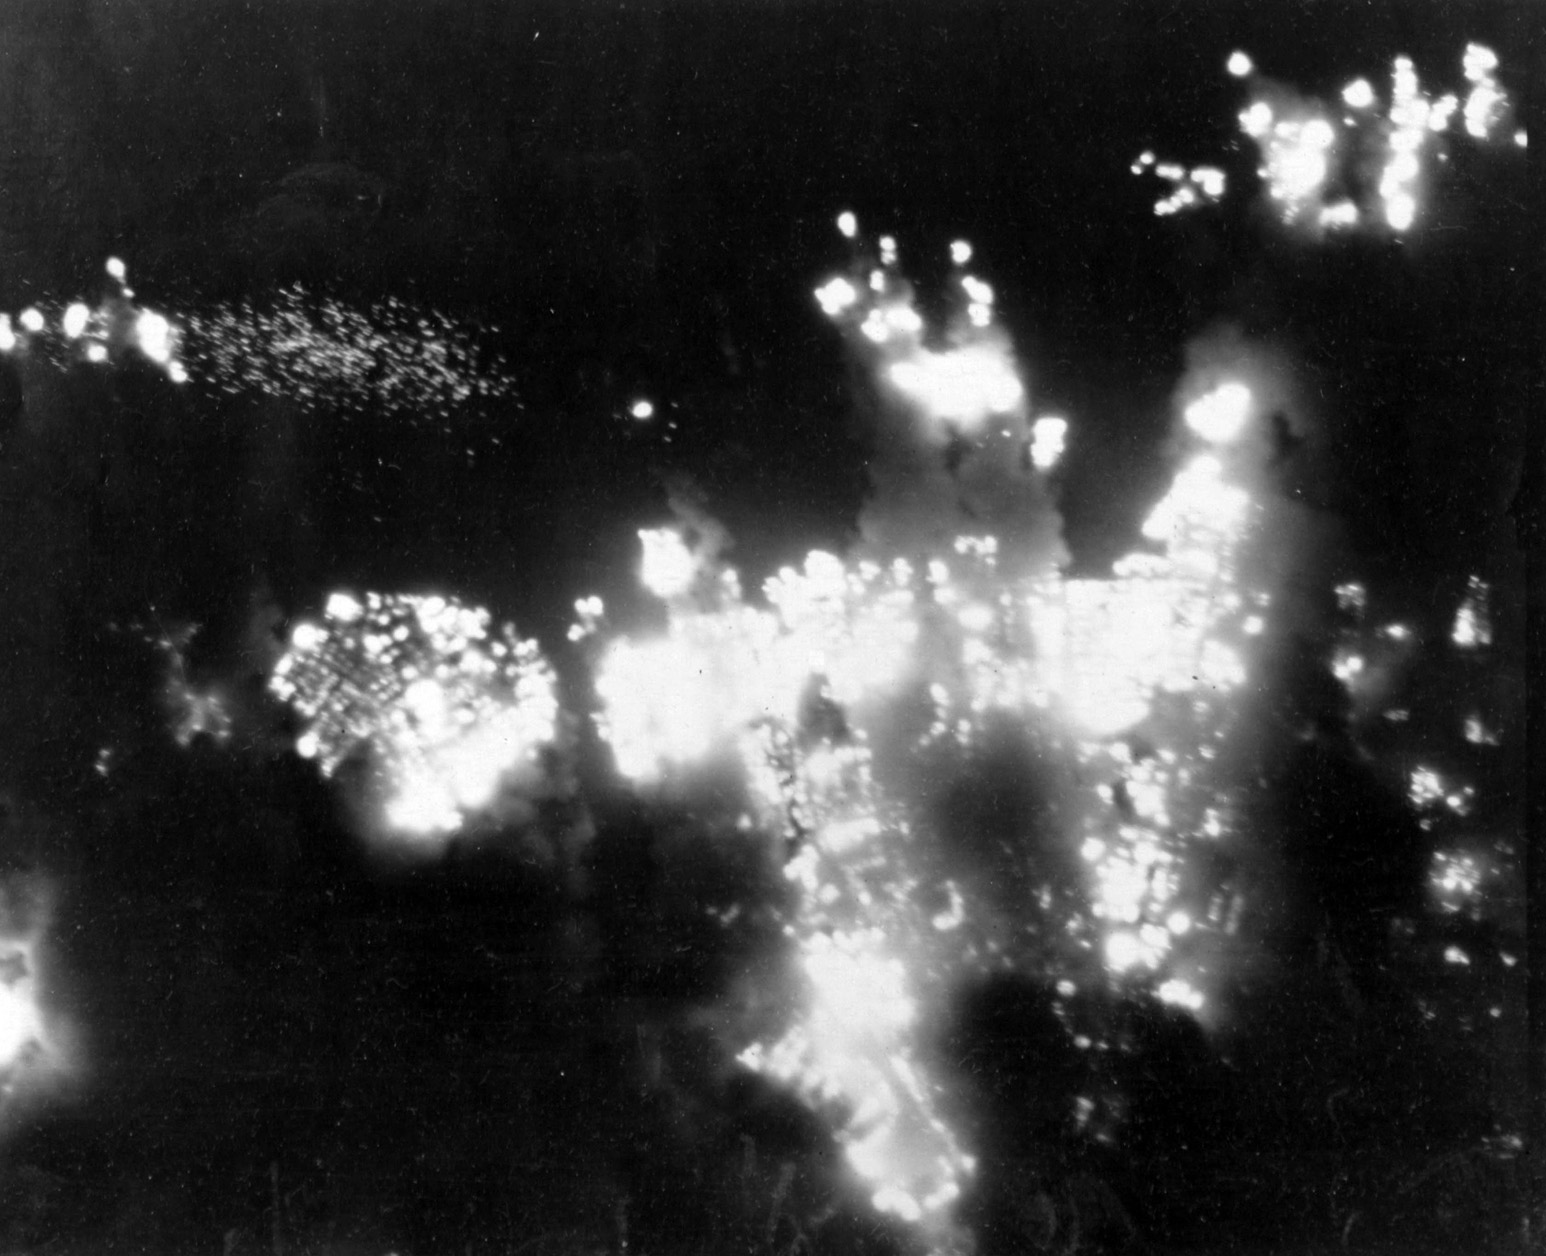 Aerial view of the flaming city of Shizouka, 85 miles southwest of Tokyo. The city was bombed 10 times during the war. On June 19, 1945, over 13,000 incendiary bombs were dropped on it, destroying nearly 27,000 homes.